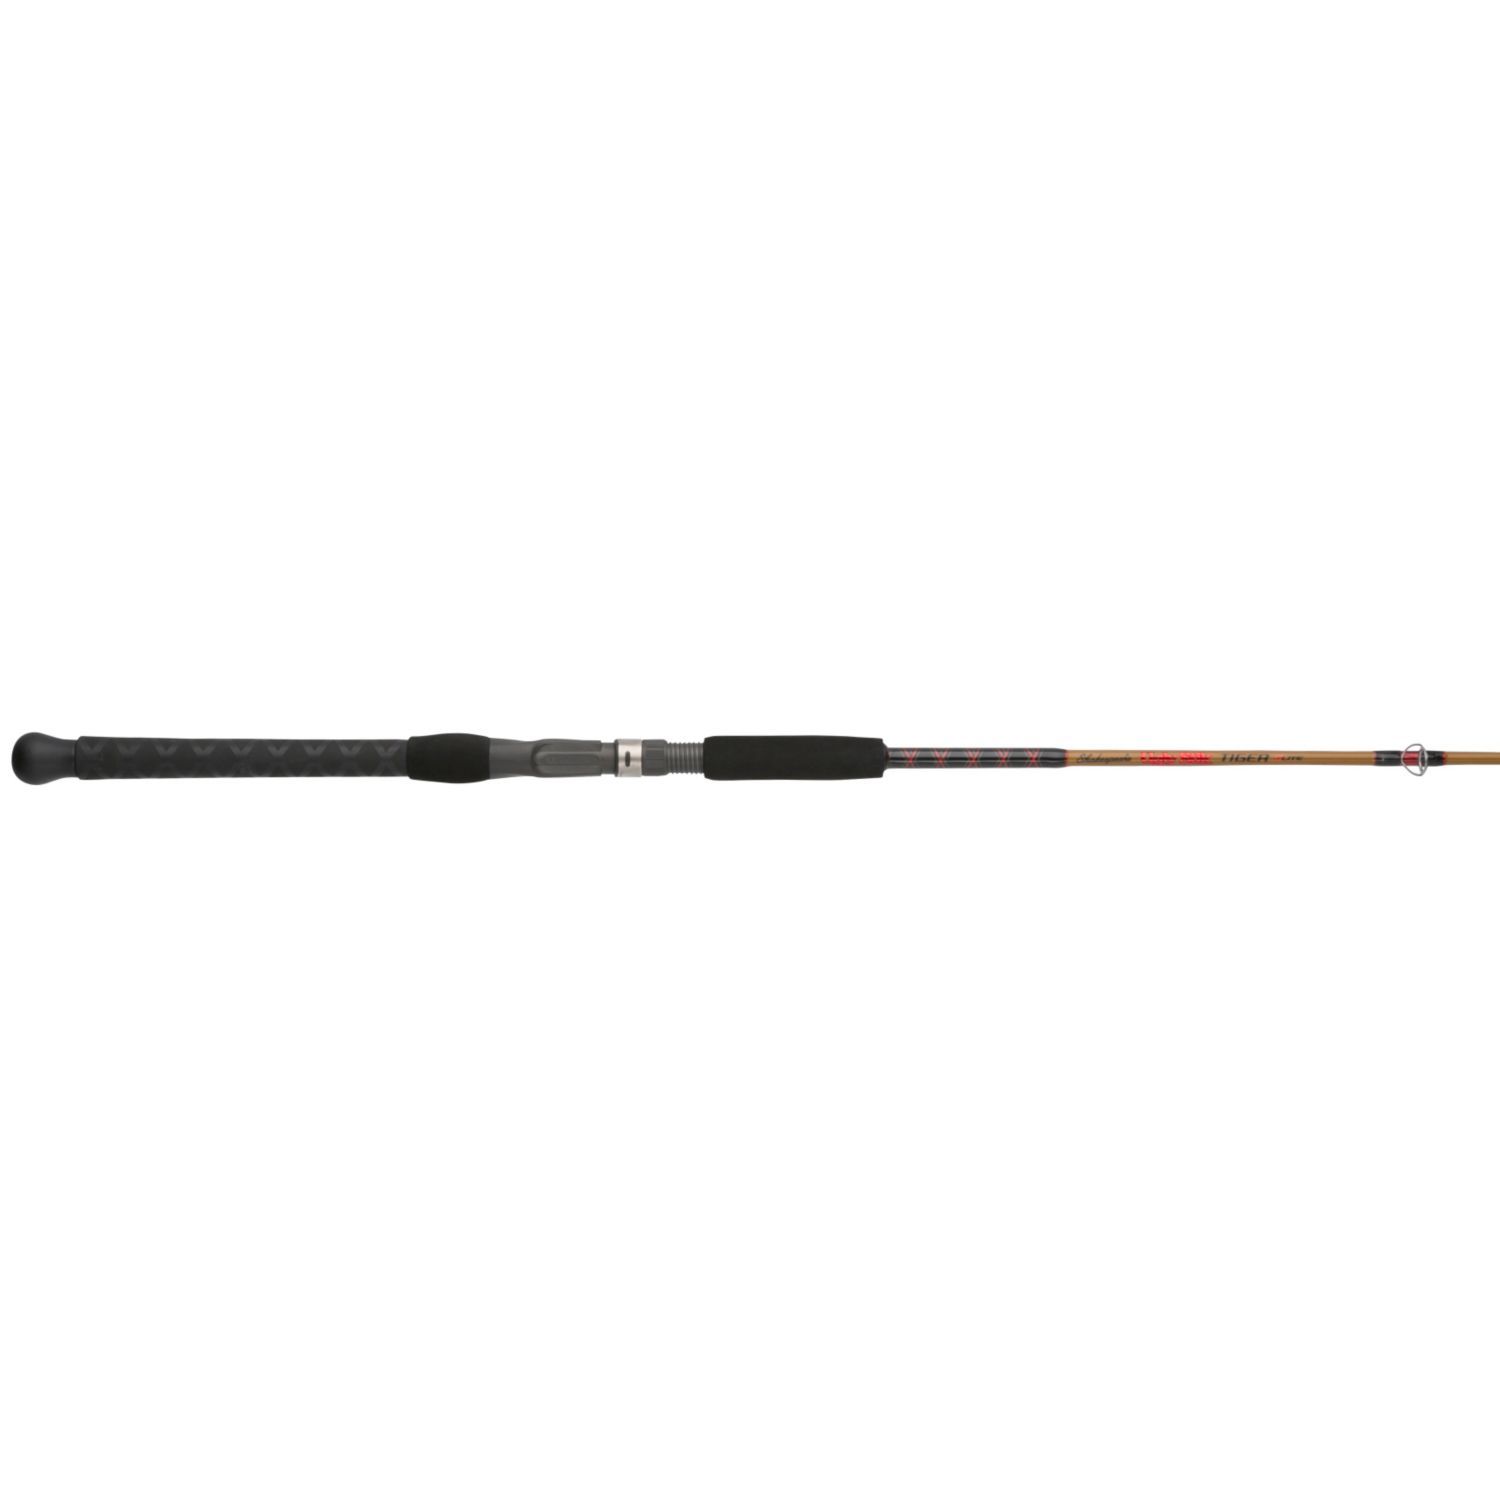 Shakespeare One-Piece Medium Heavy Action Ugly Stik Tiger Lite Casting Rod  6' 6 at OutdoorShopping